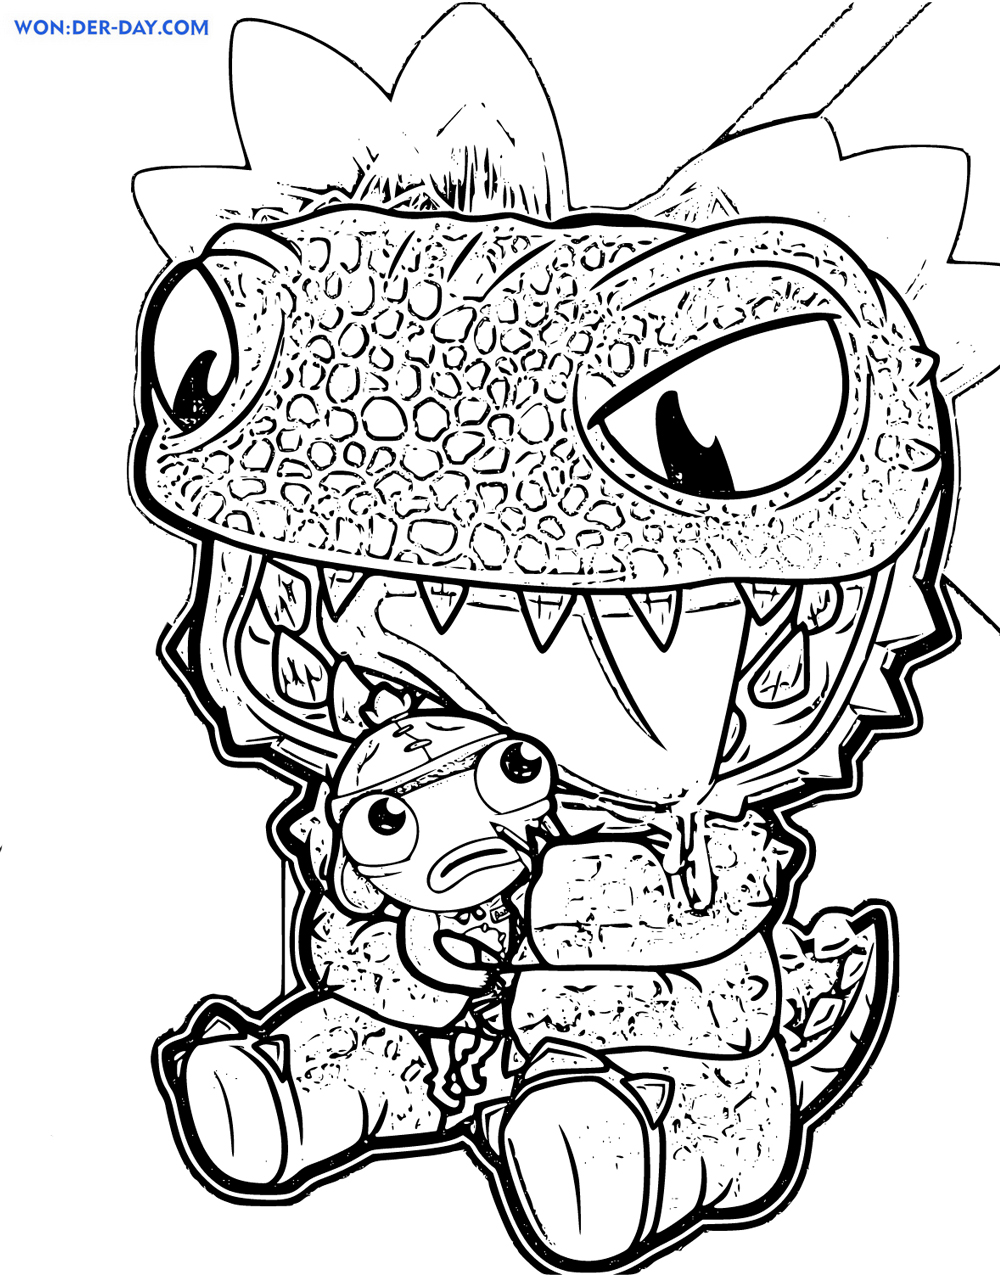 Klombo Fortnite Coloring Pages   WONDER DAY — Coloring pages for ...